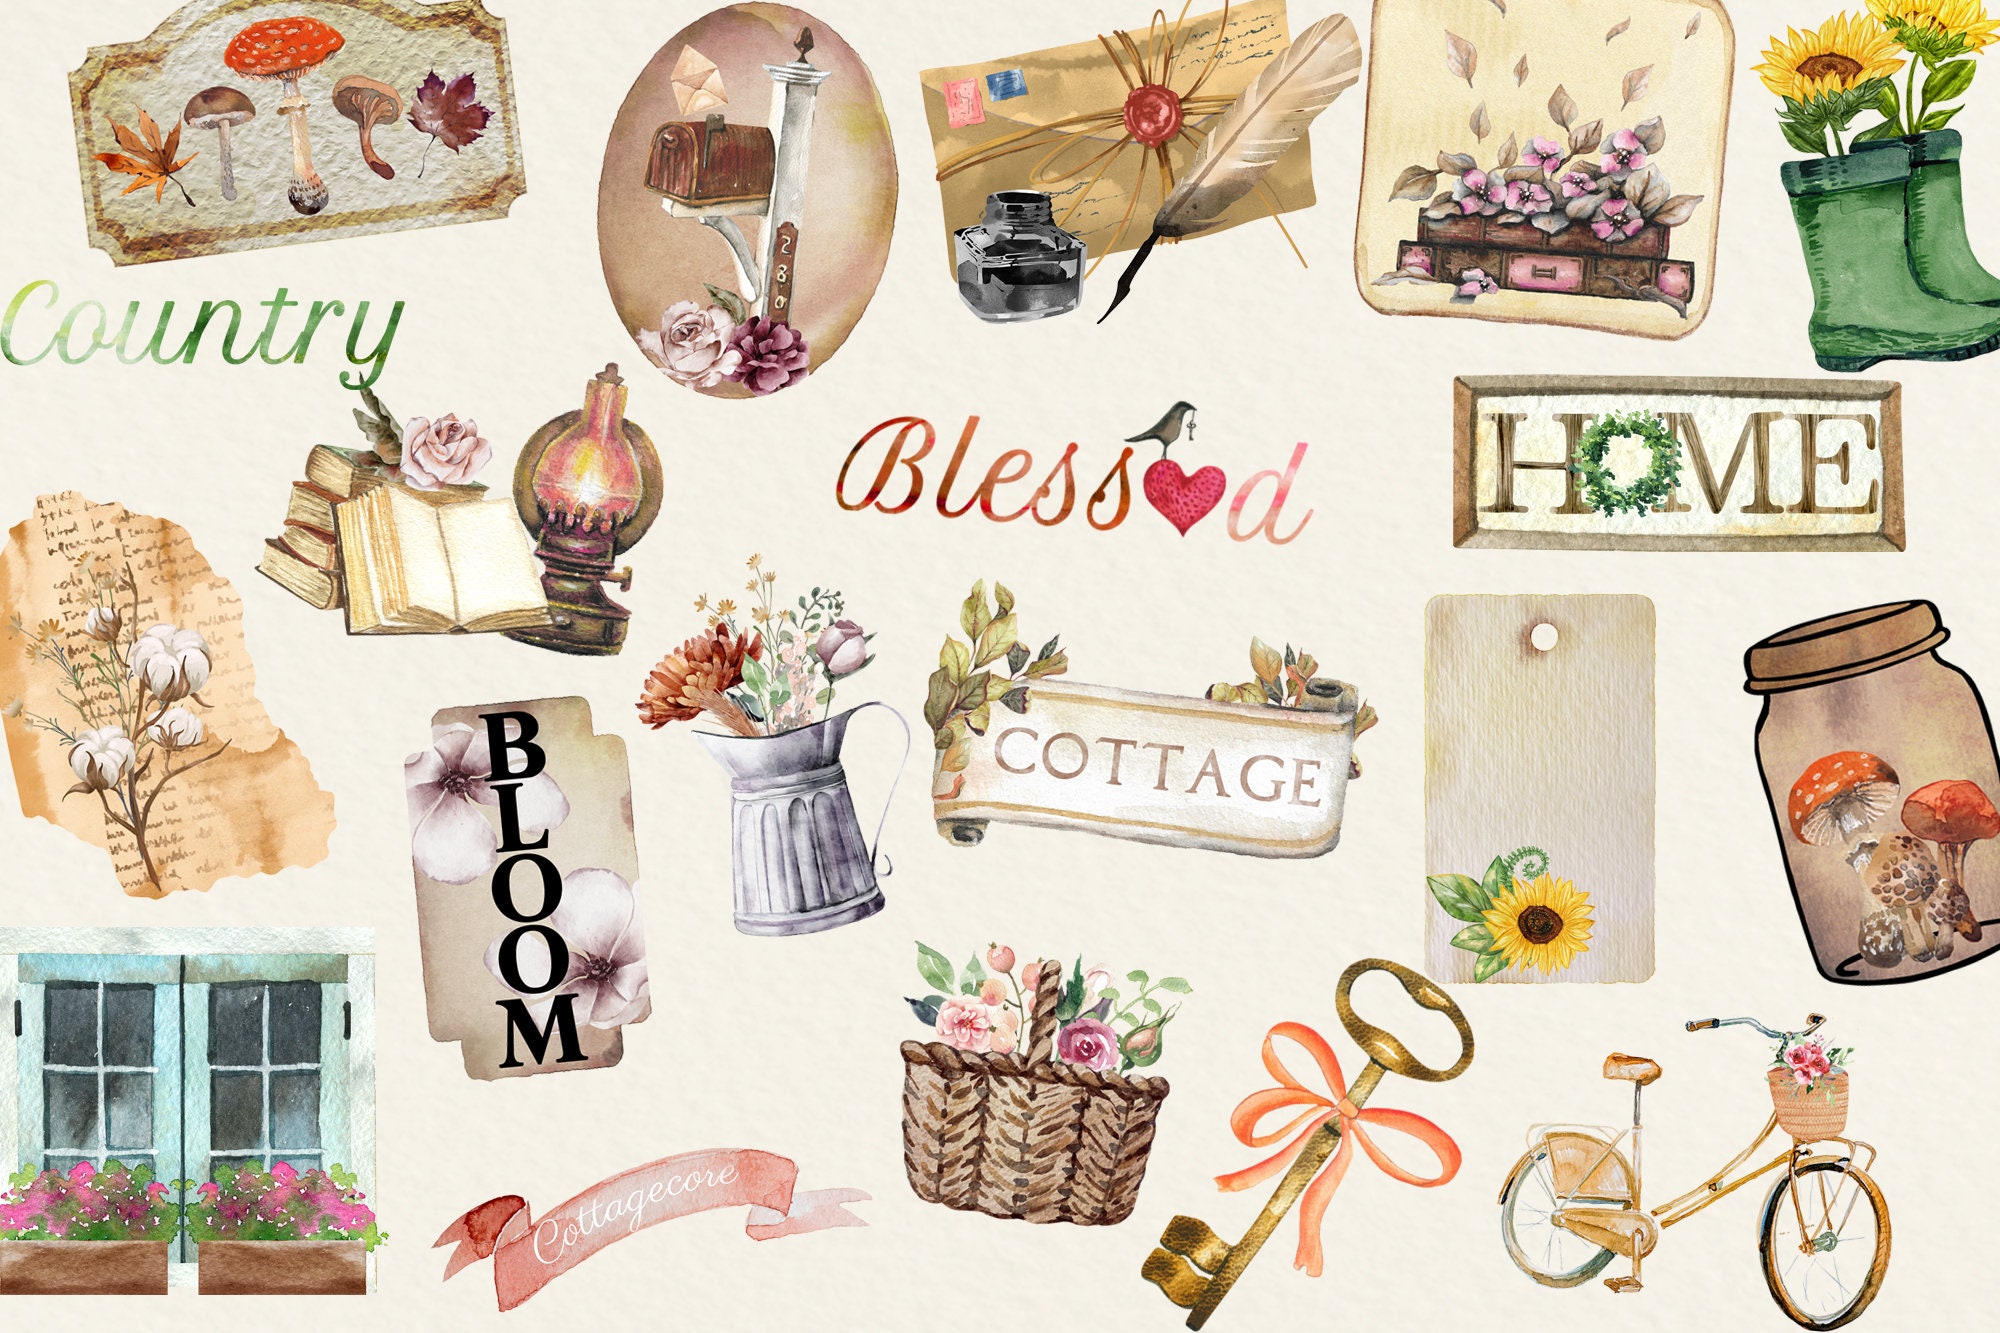 Craft Icon Sticker Sheet Printable – The Country Chic Cottage